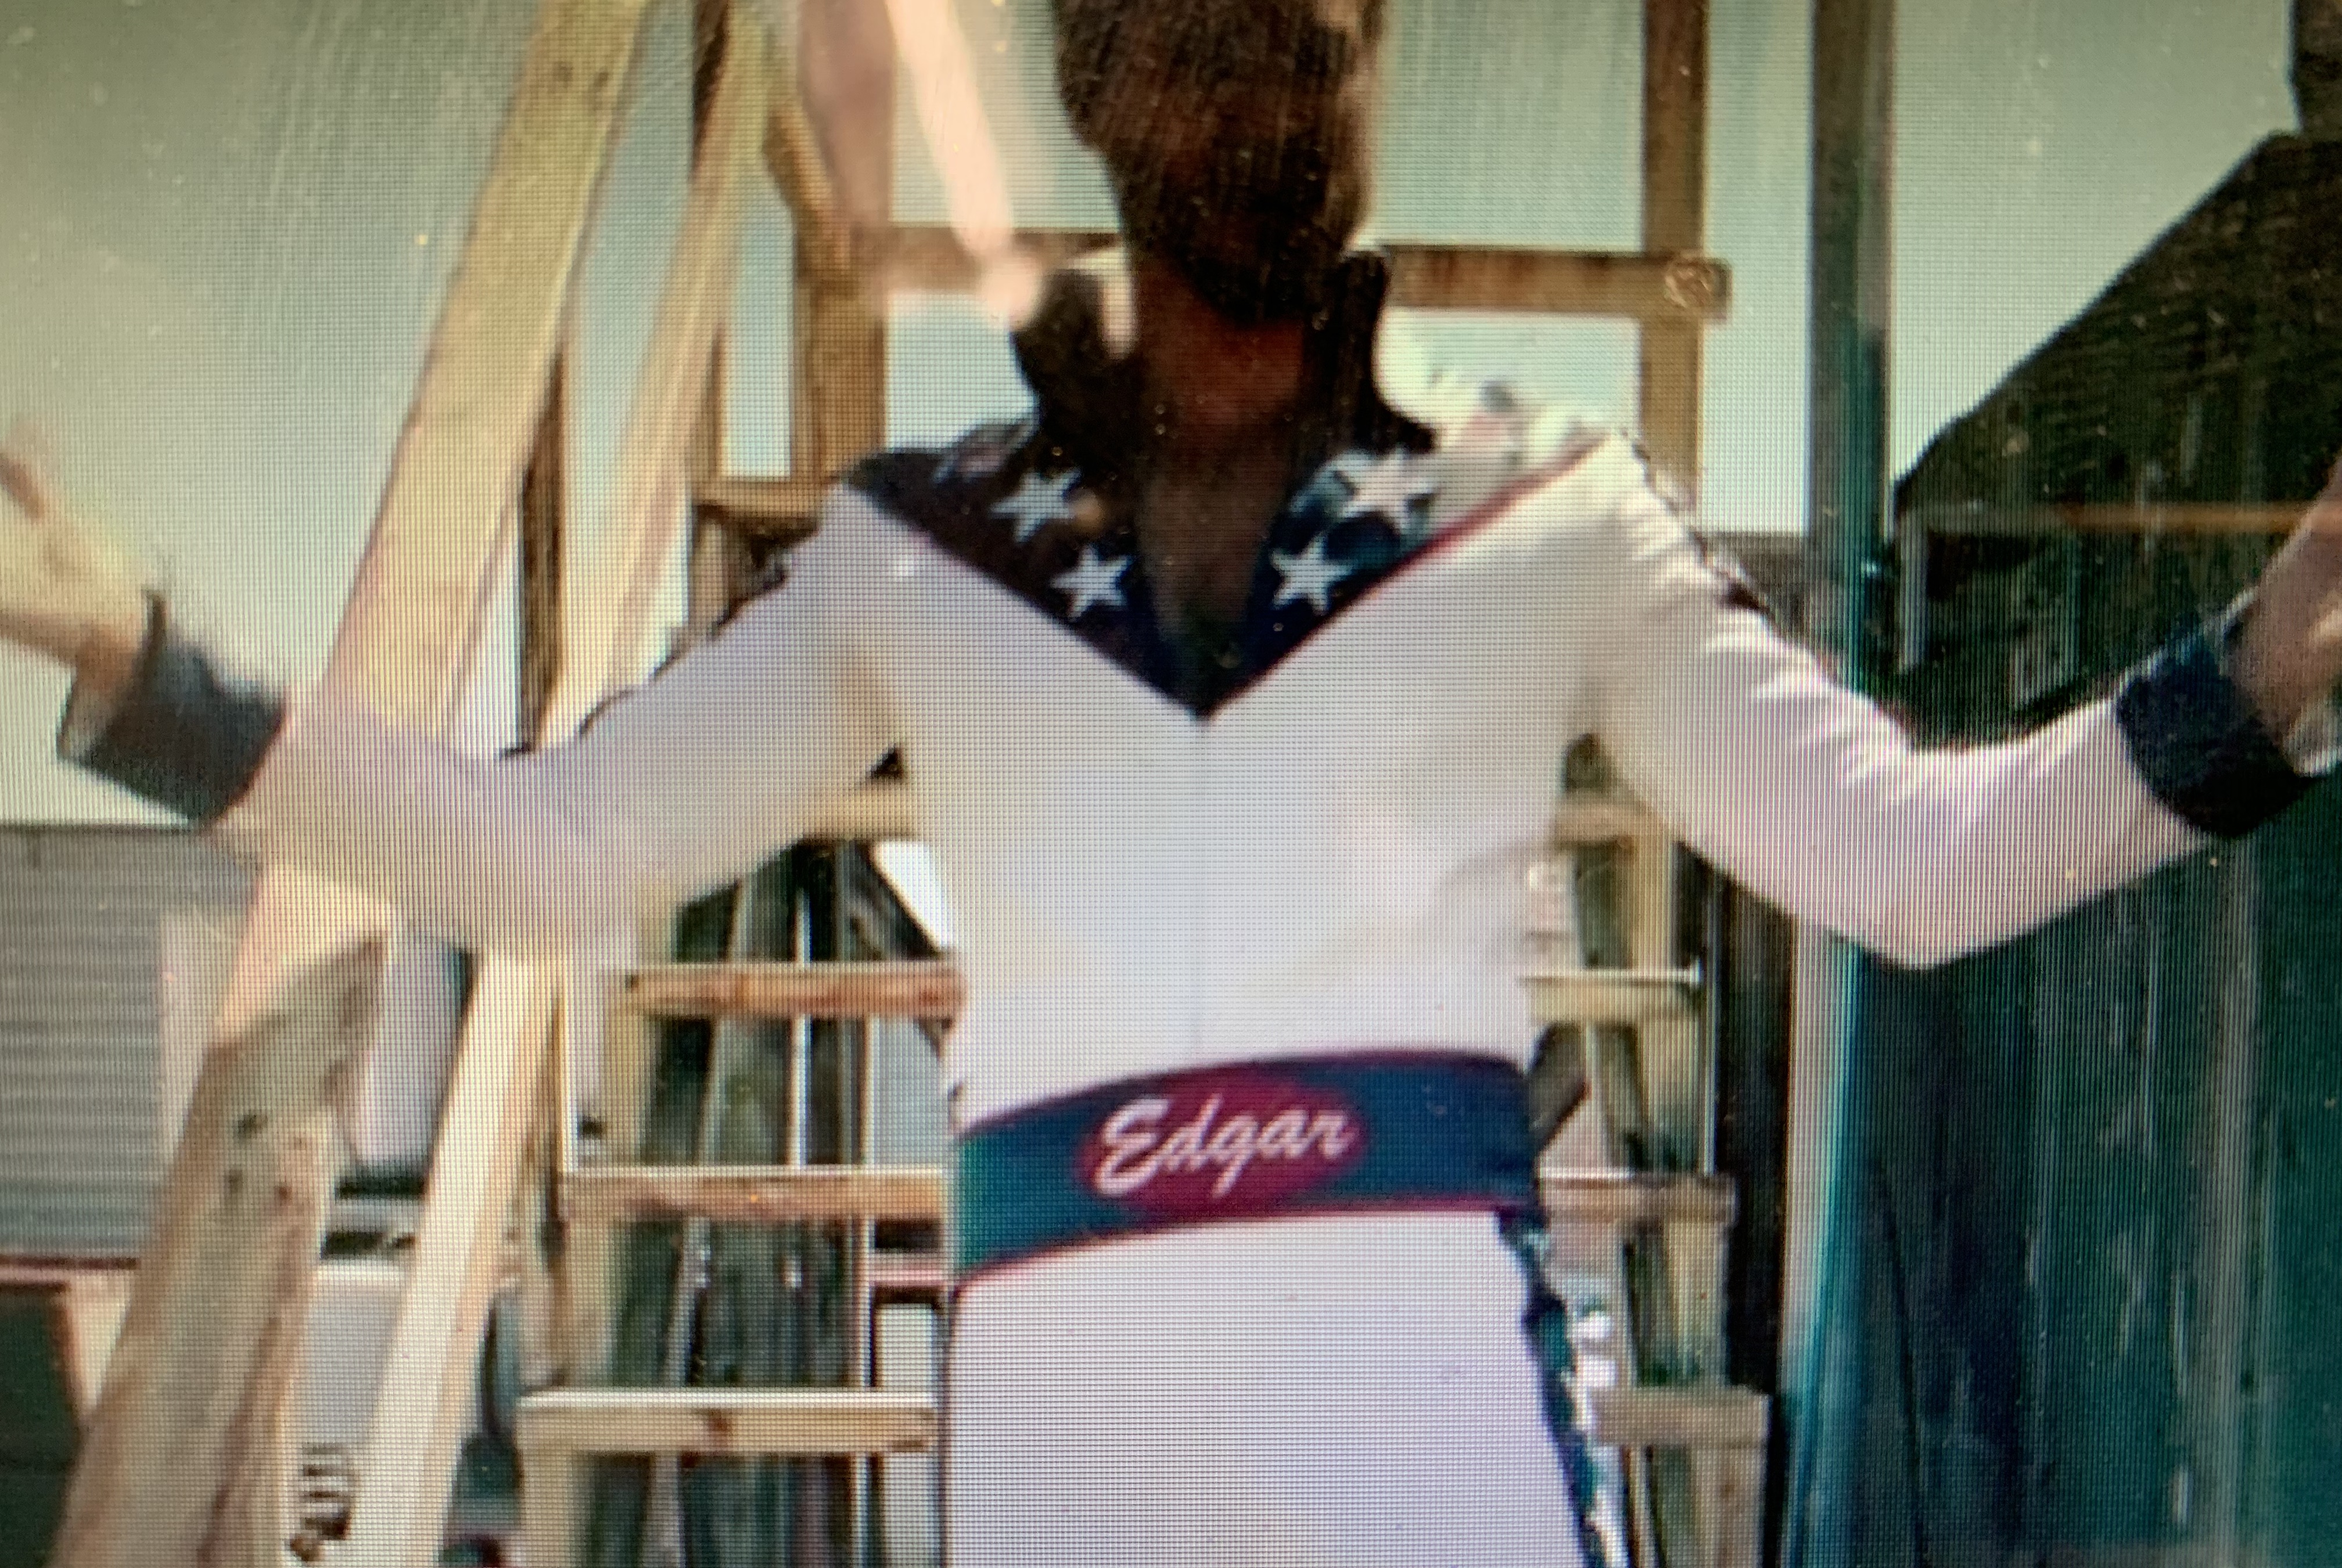 Edgar in his Evel Knievel jumpsuit